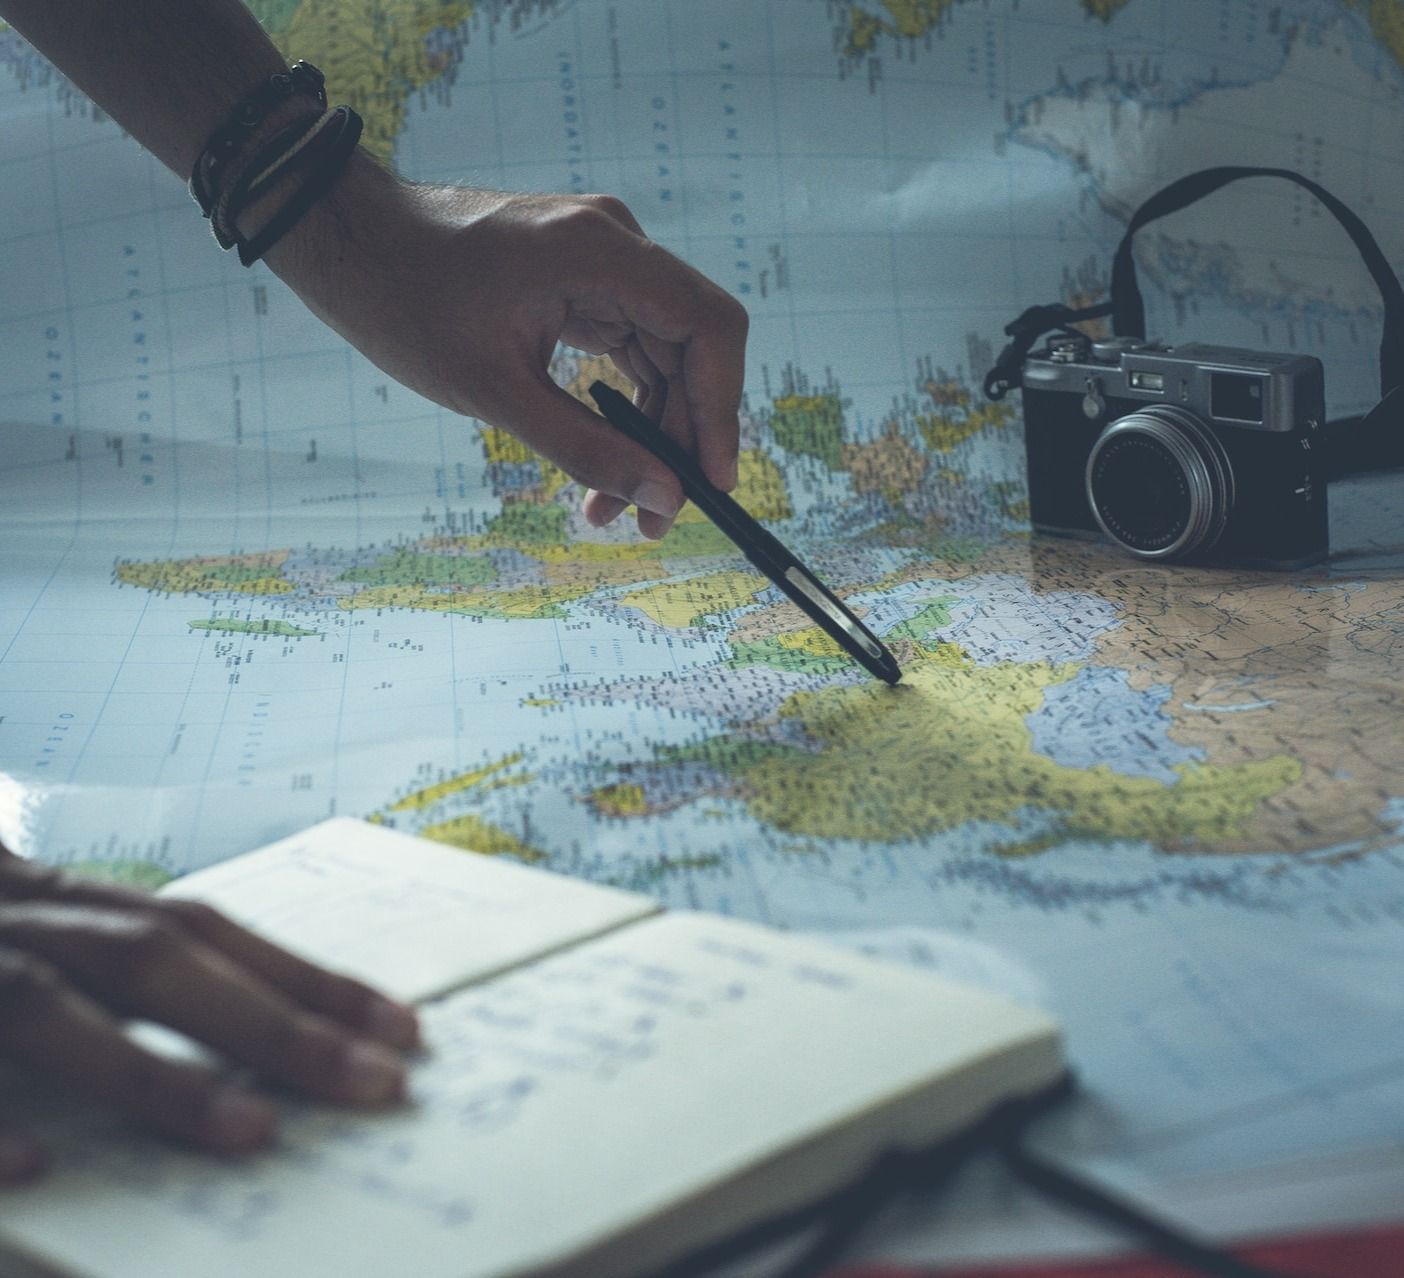 Person planning their travels with a camera, notebook and map